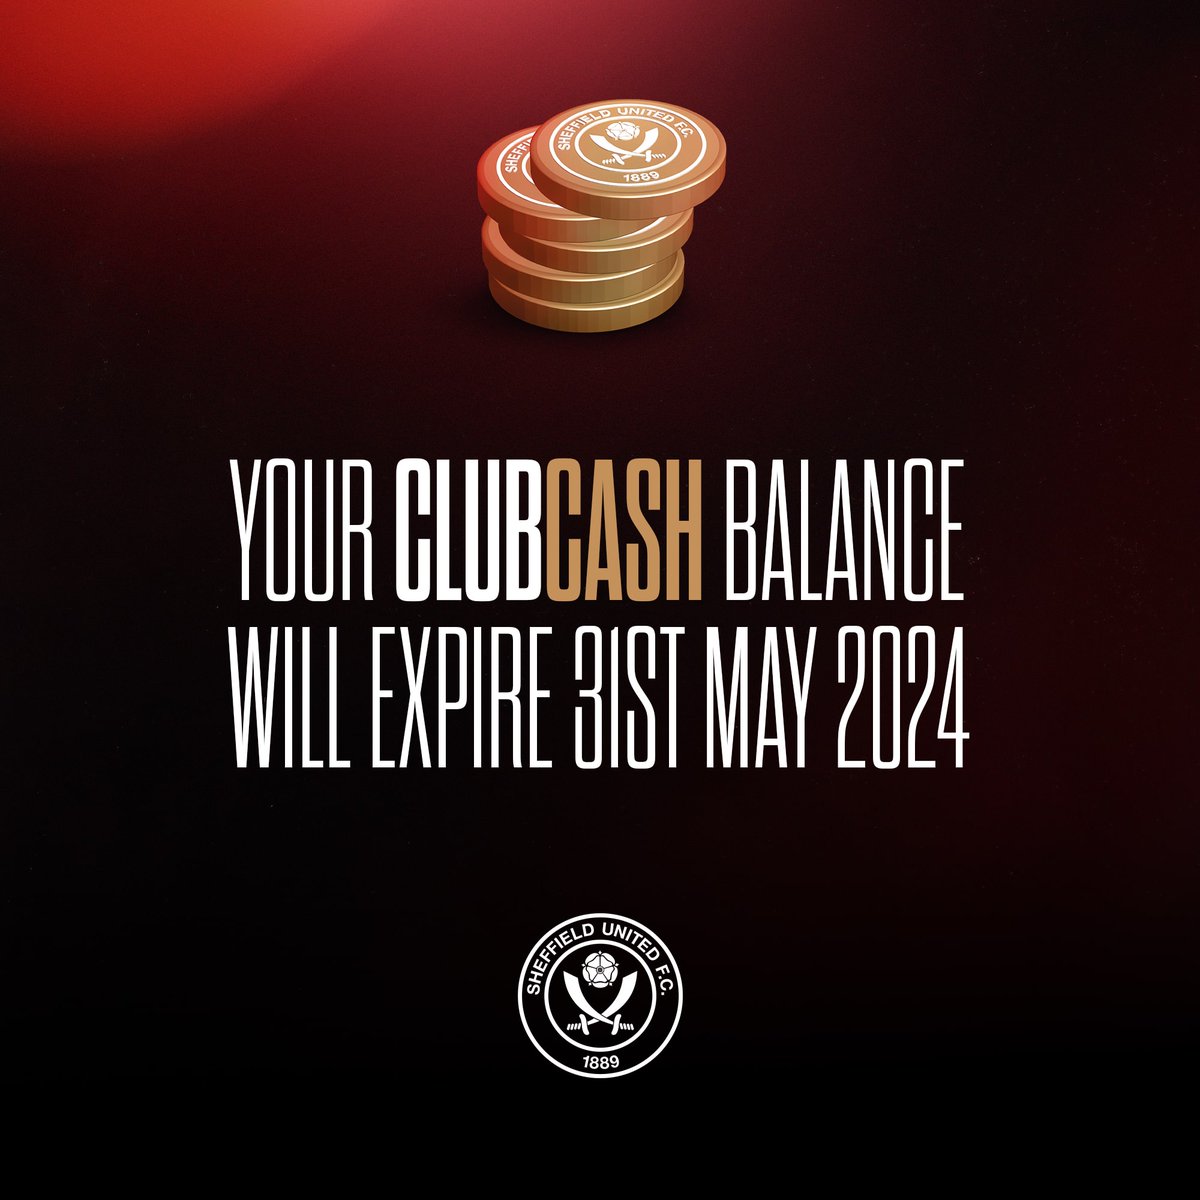 Your ClubCash can be redeemed against retail items in-store and online. ⚔️🛍️ Any outstanding balance after this date will not be carried forward on your account as per our ClubCash terms and conditions of use. ℹ️